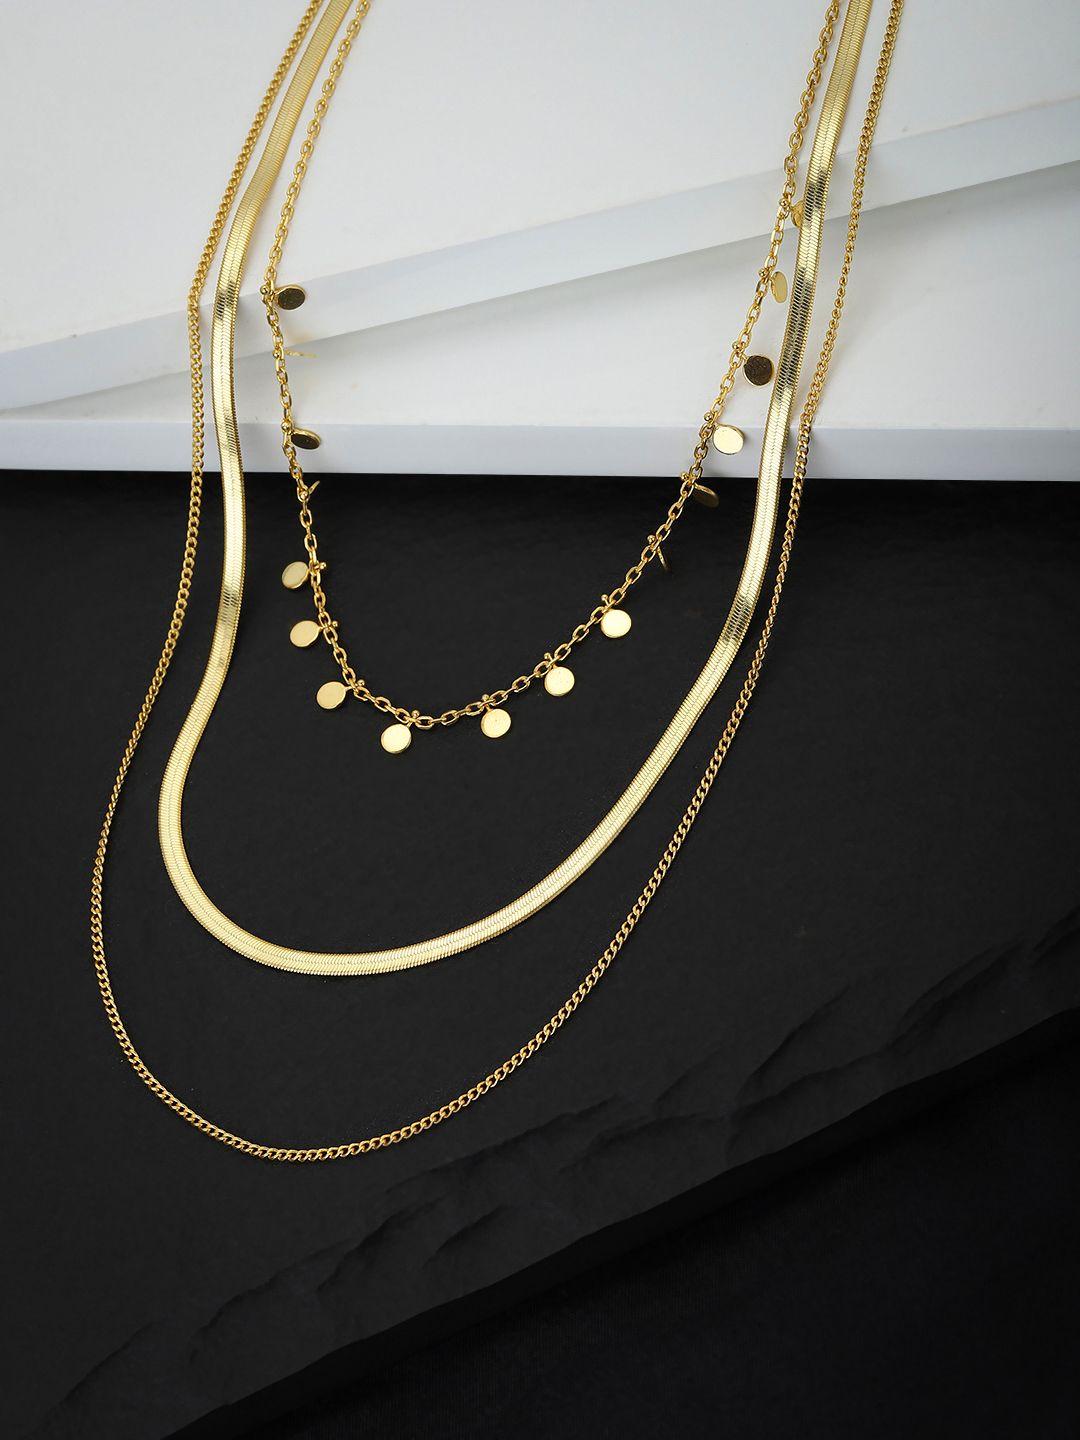 carlton london gold-toned brass gold-plated layered necklace